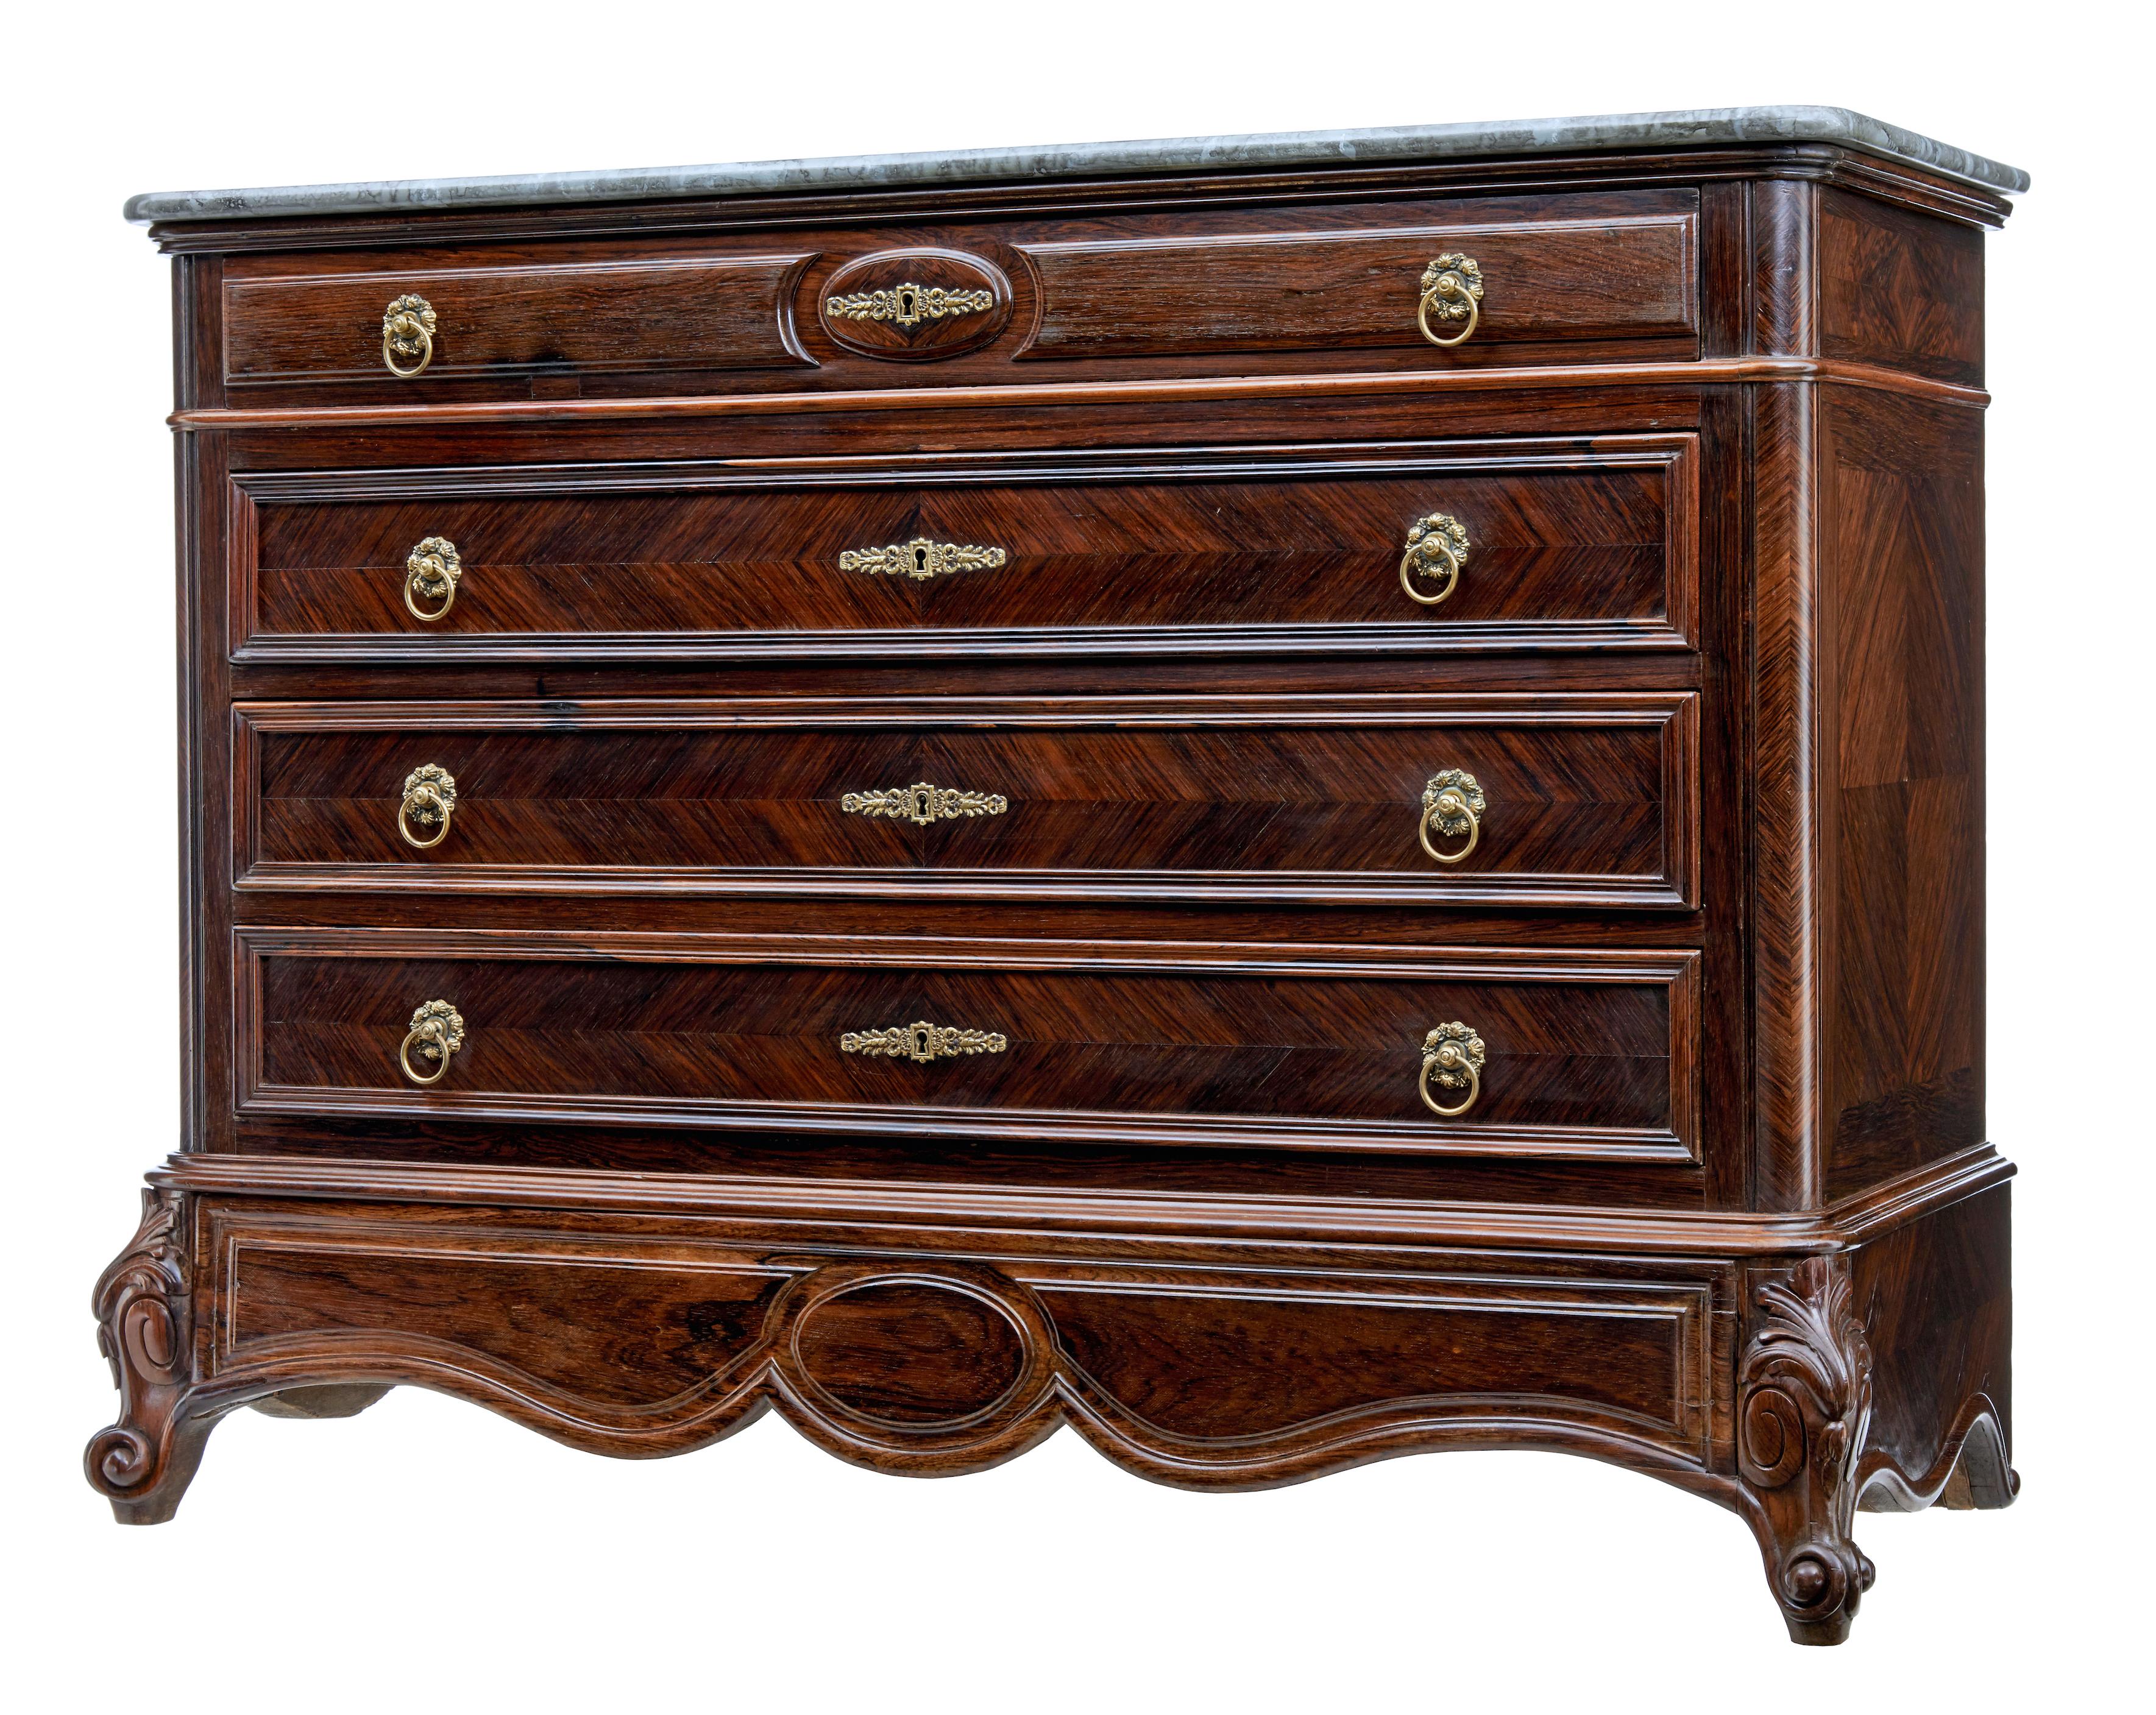 Large 19th century French palisander chest of drawers, circa 1860.

Stunning French commode of grand proportions beautifully veneered in palisander from the rosewood family.

Fitted with 4 drawer's of equal proportions, decorated with beaded